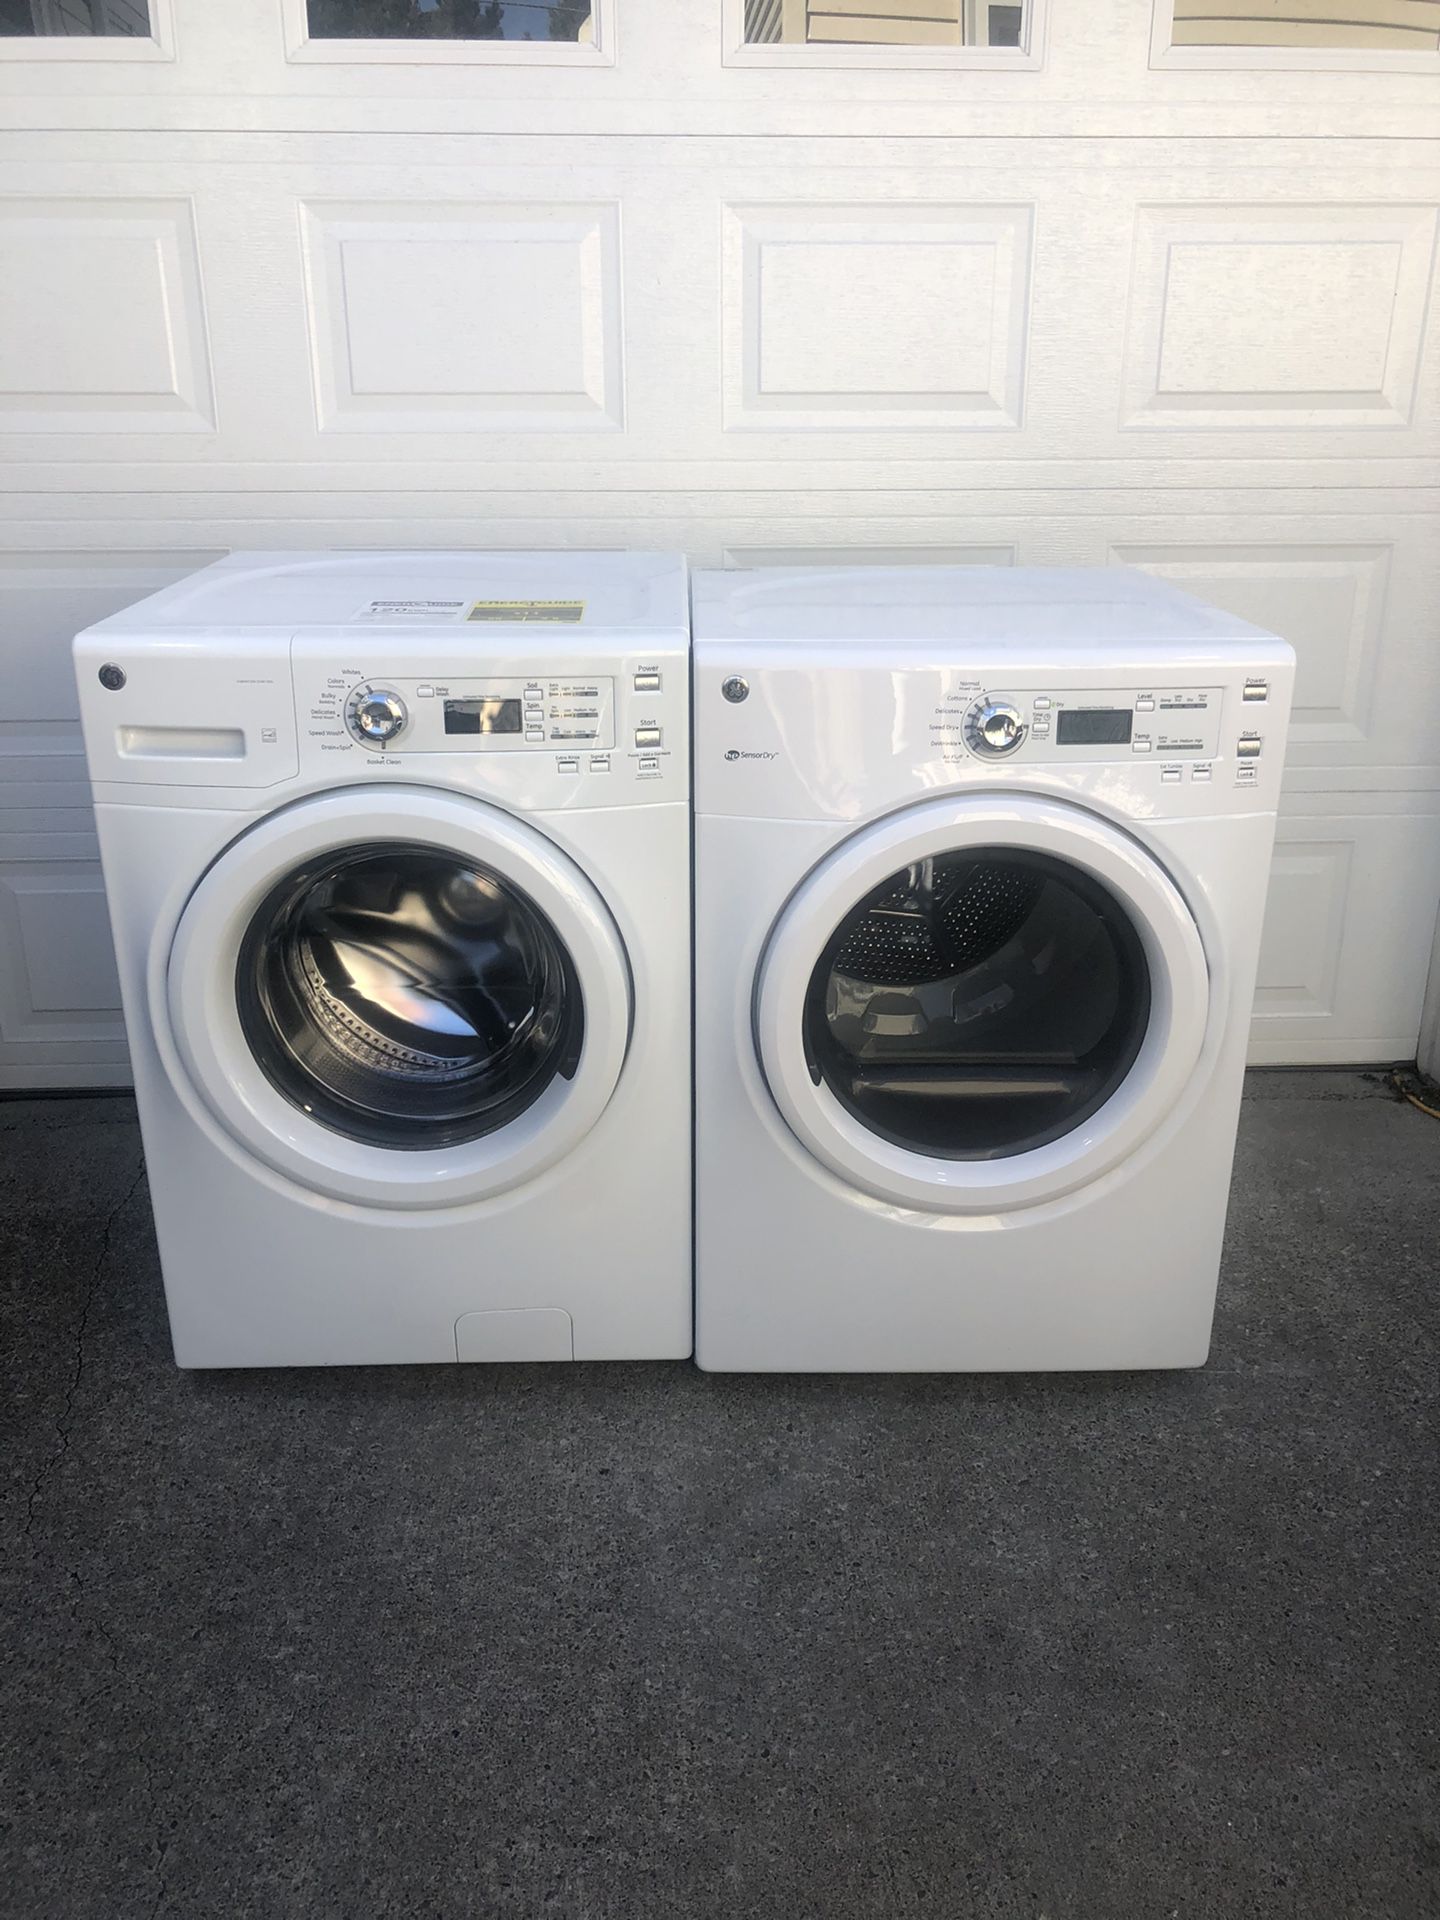 GE Washer & Dryer - Stackable 